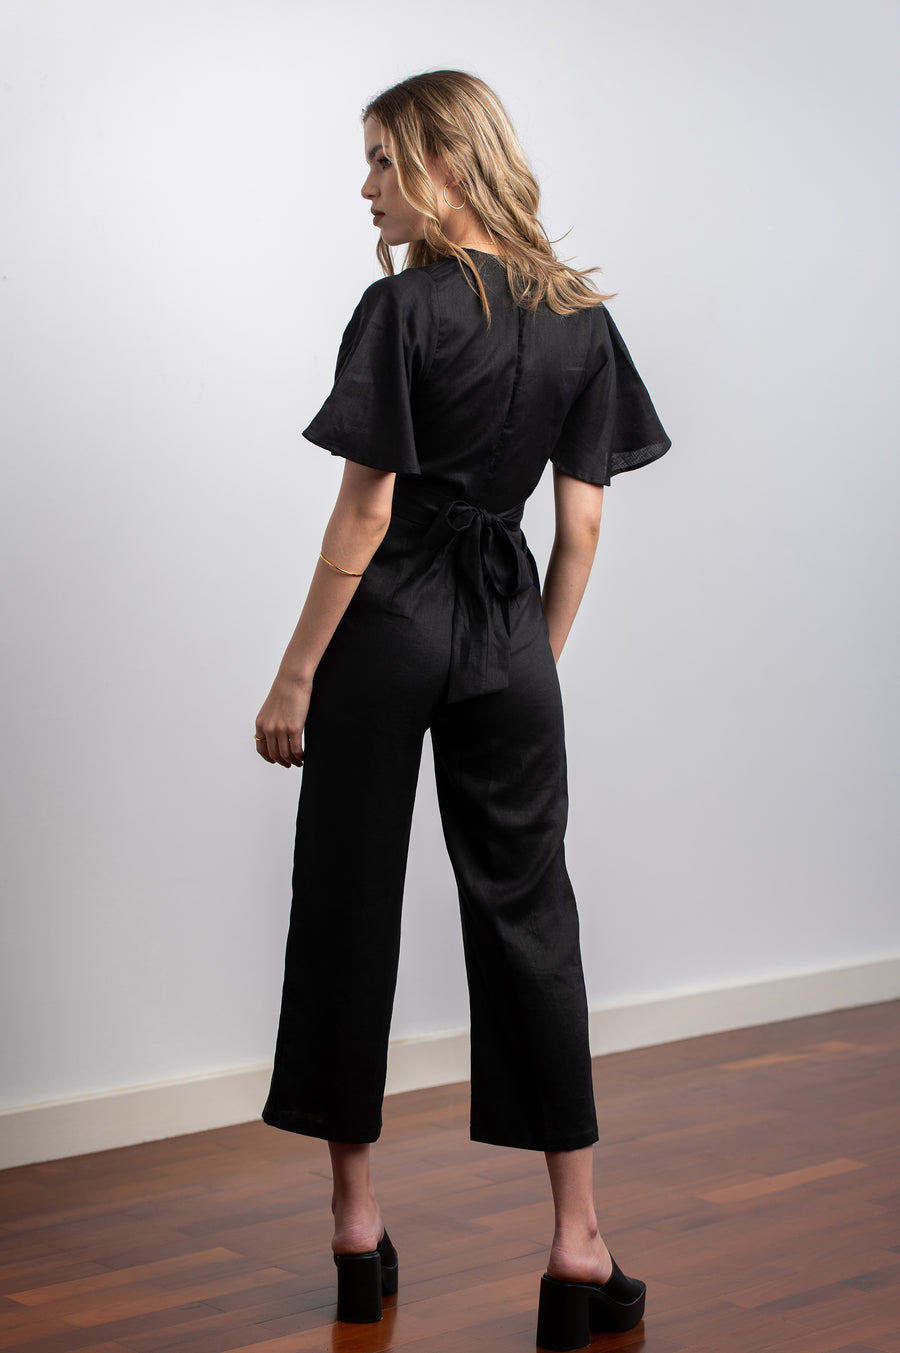 The Jumpsuit in Black